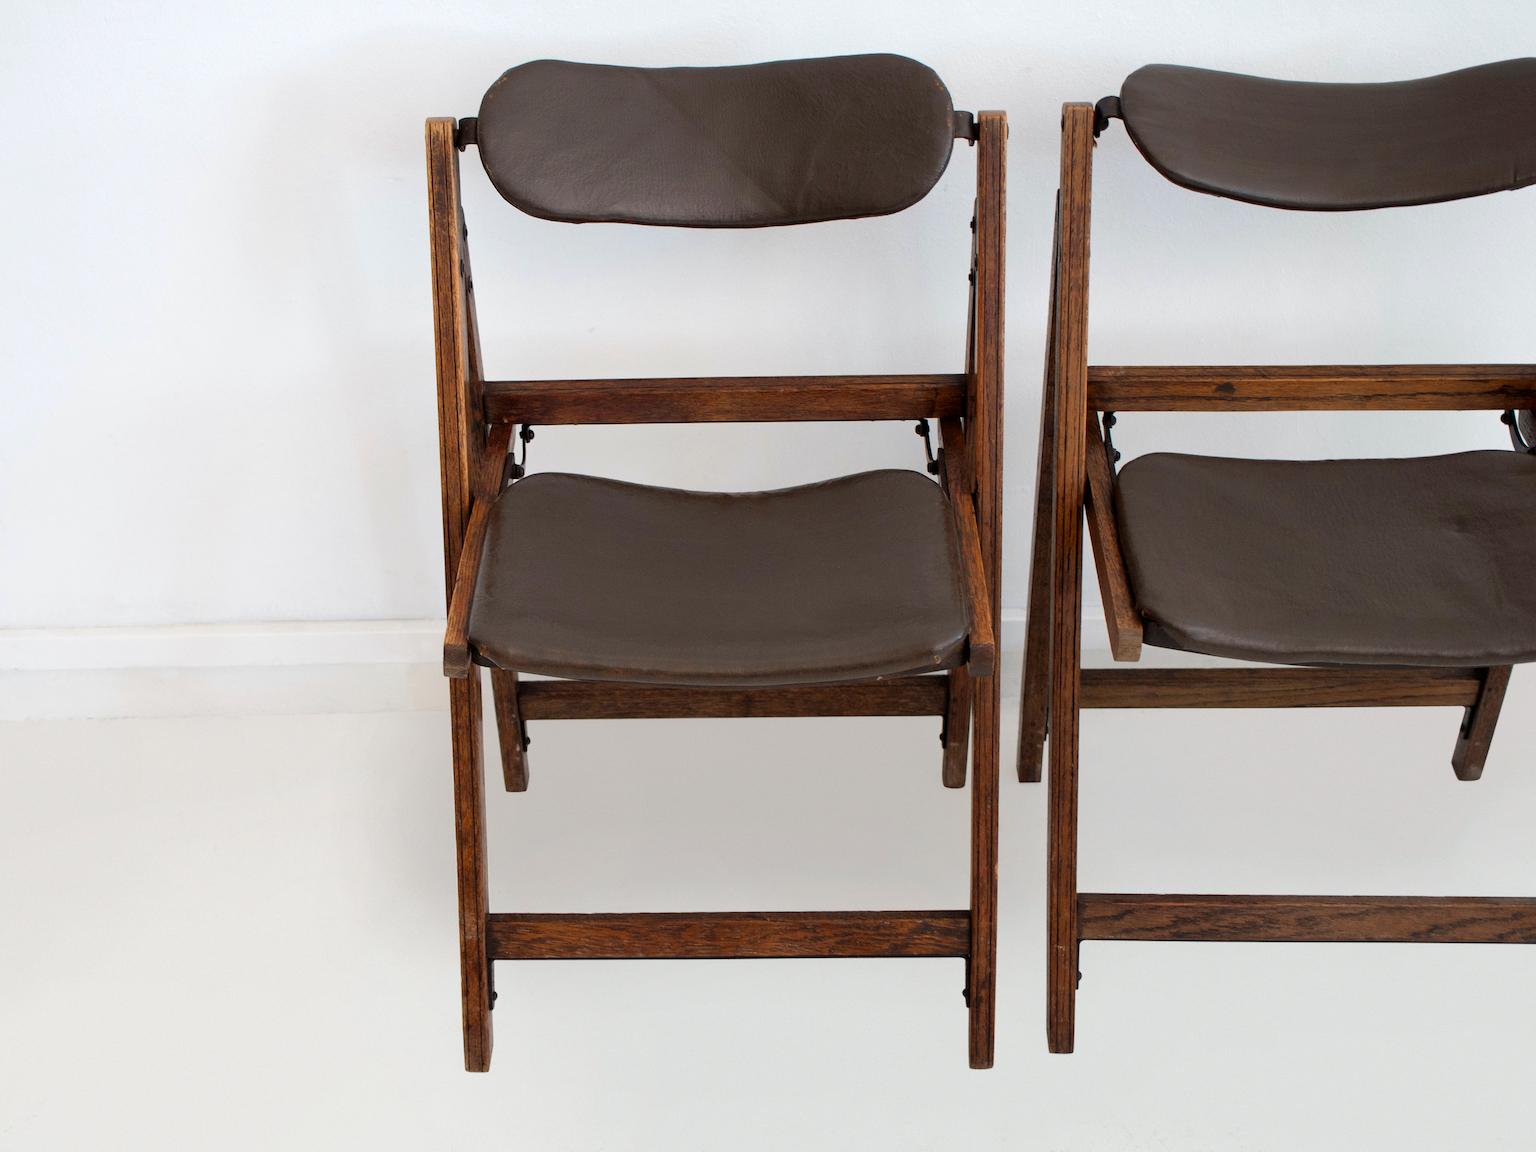 British Pair of Brown Folding Chairs with Oak Frame